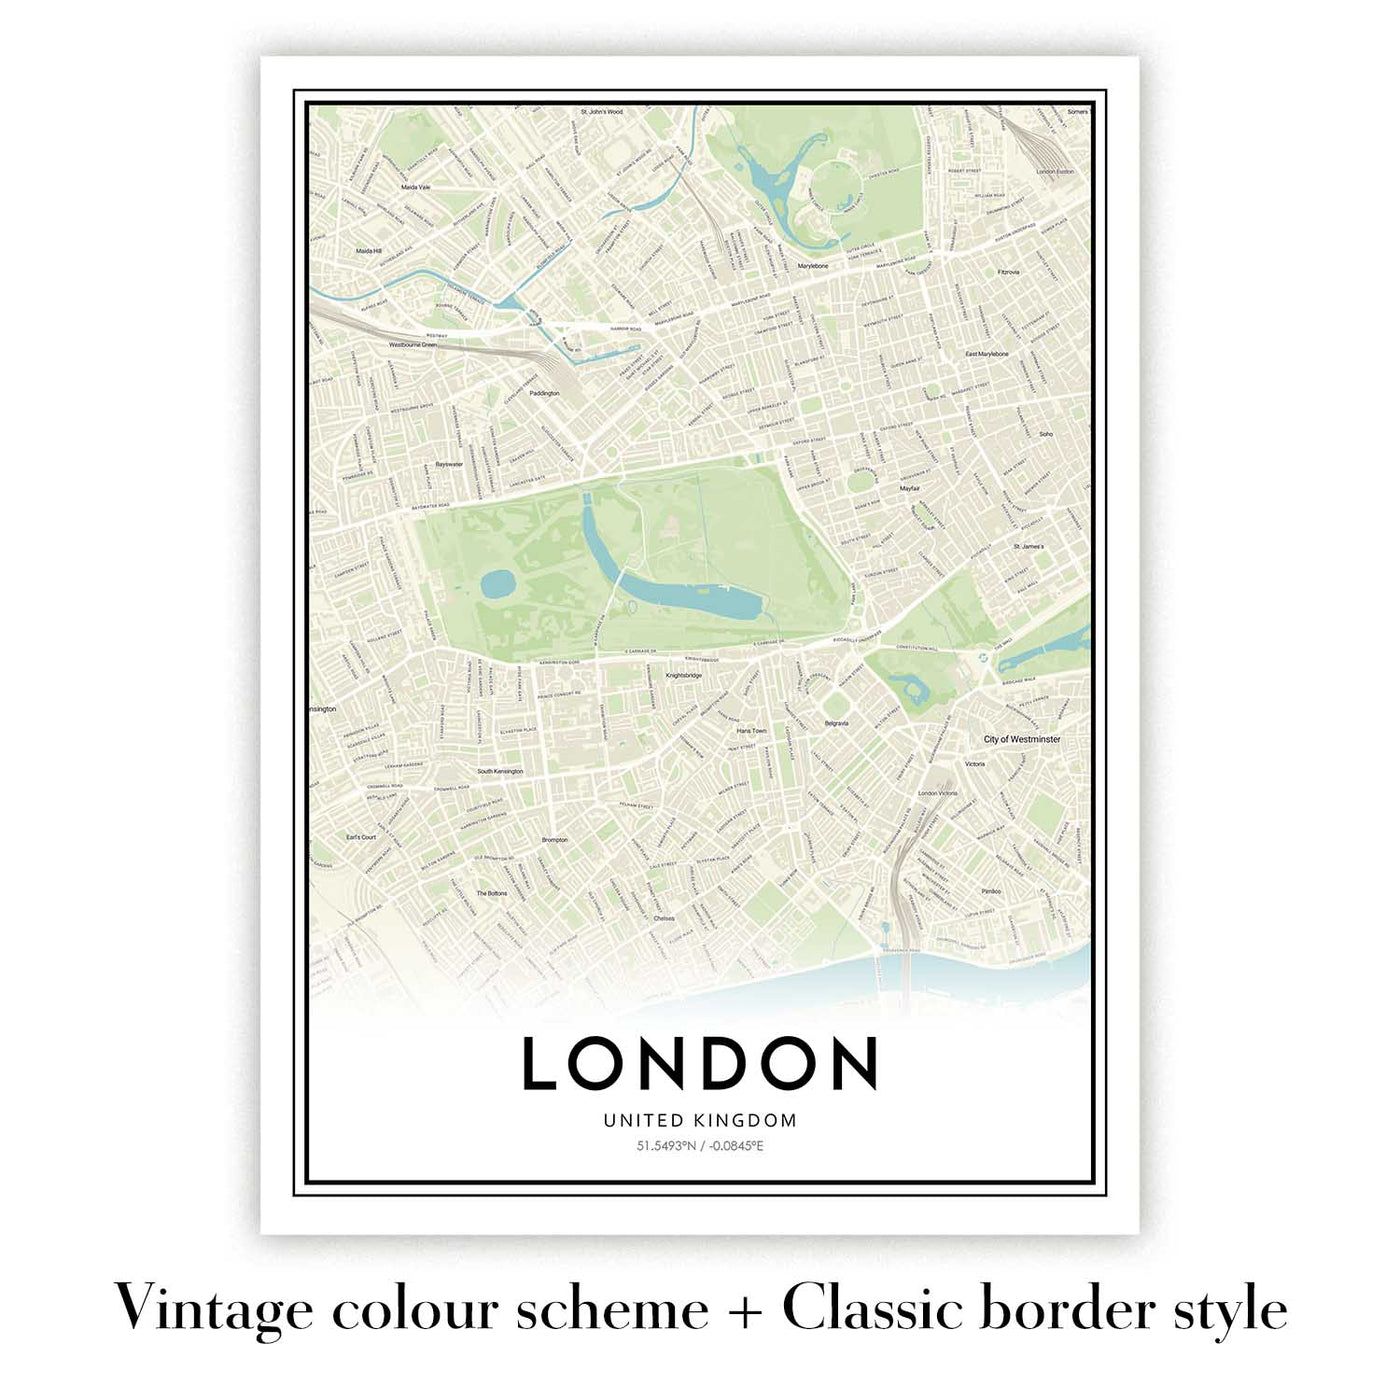 Personalised Modern Map - Make Your Own City & Street Map